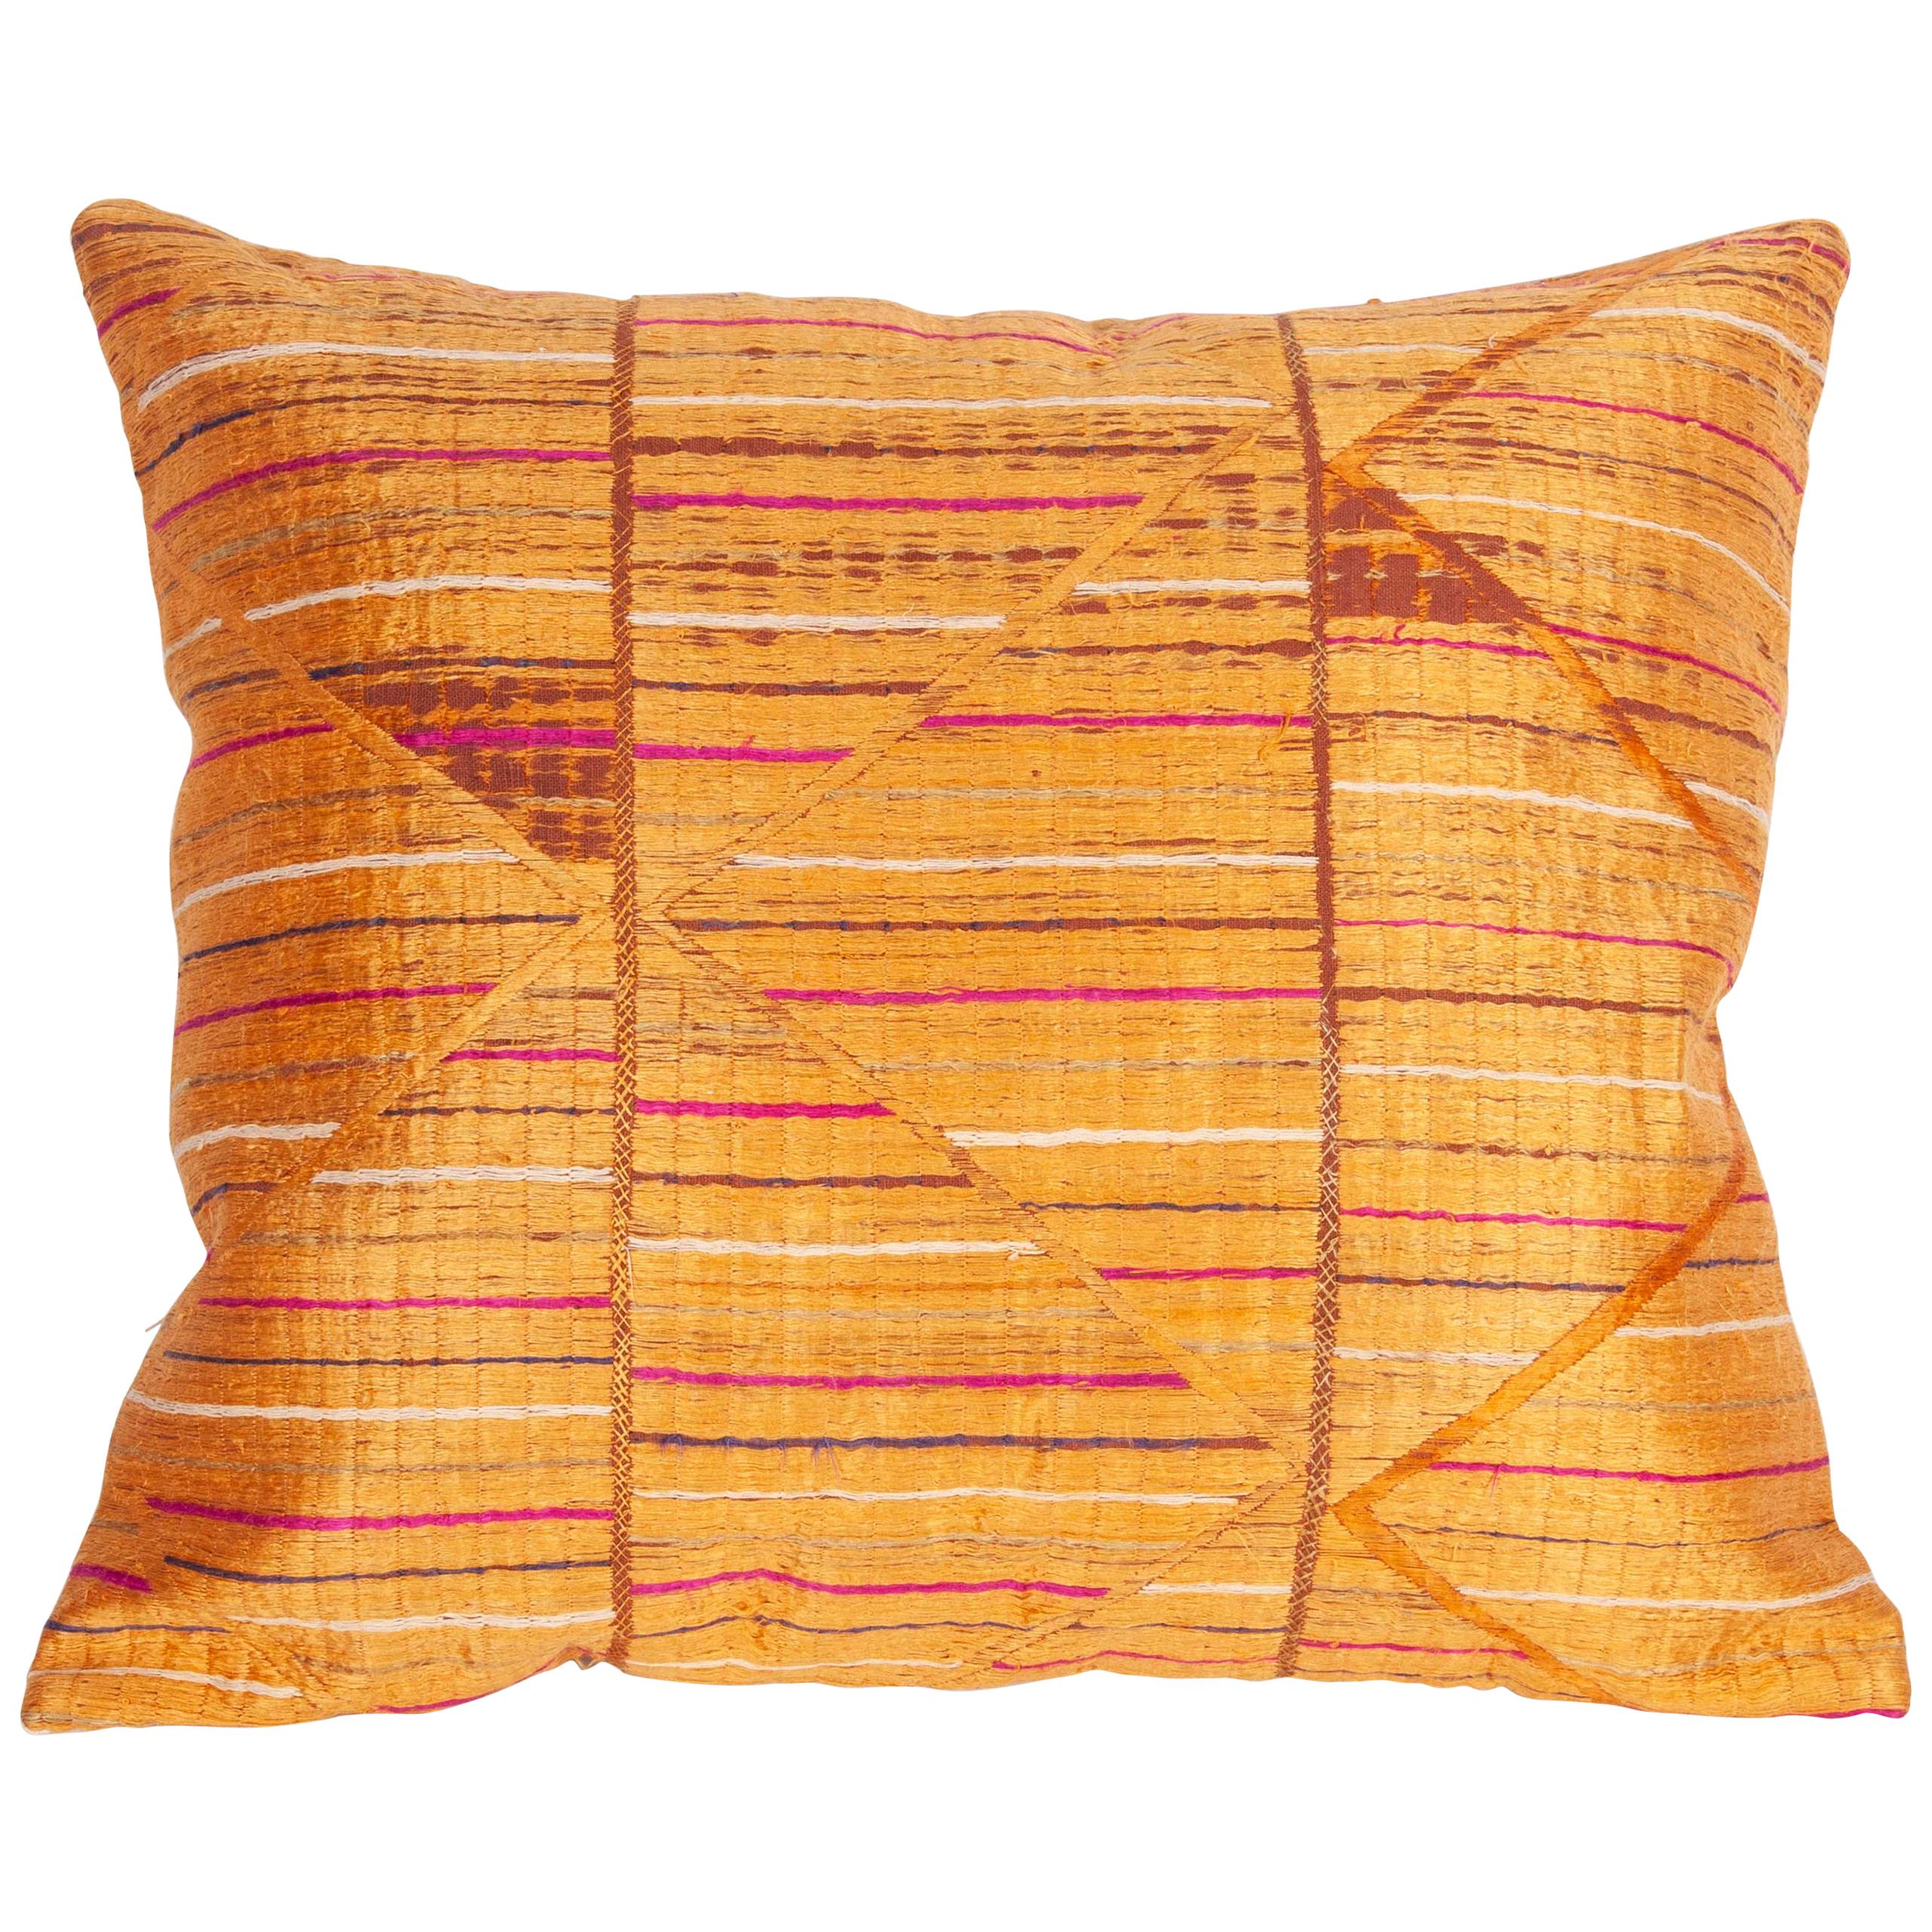 Pillow Case Fashioned from a Phulkari 'Wedding Shawl' from India